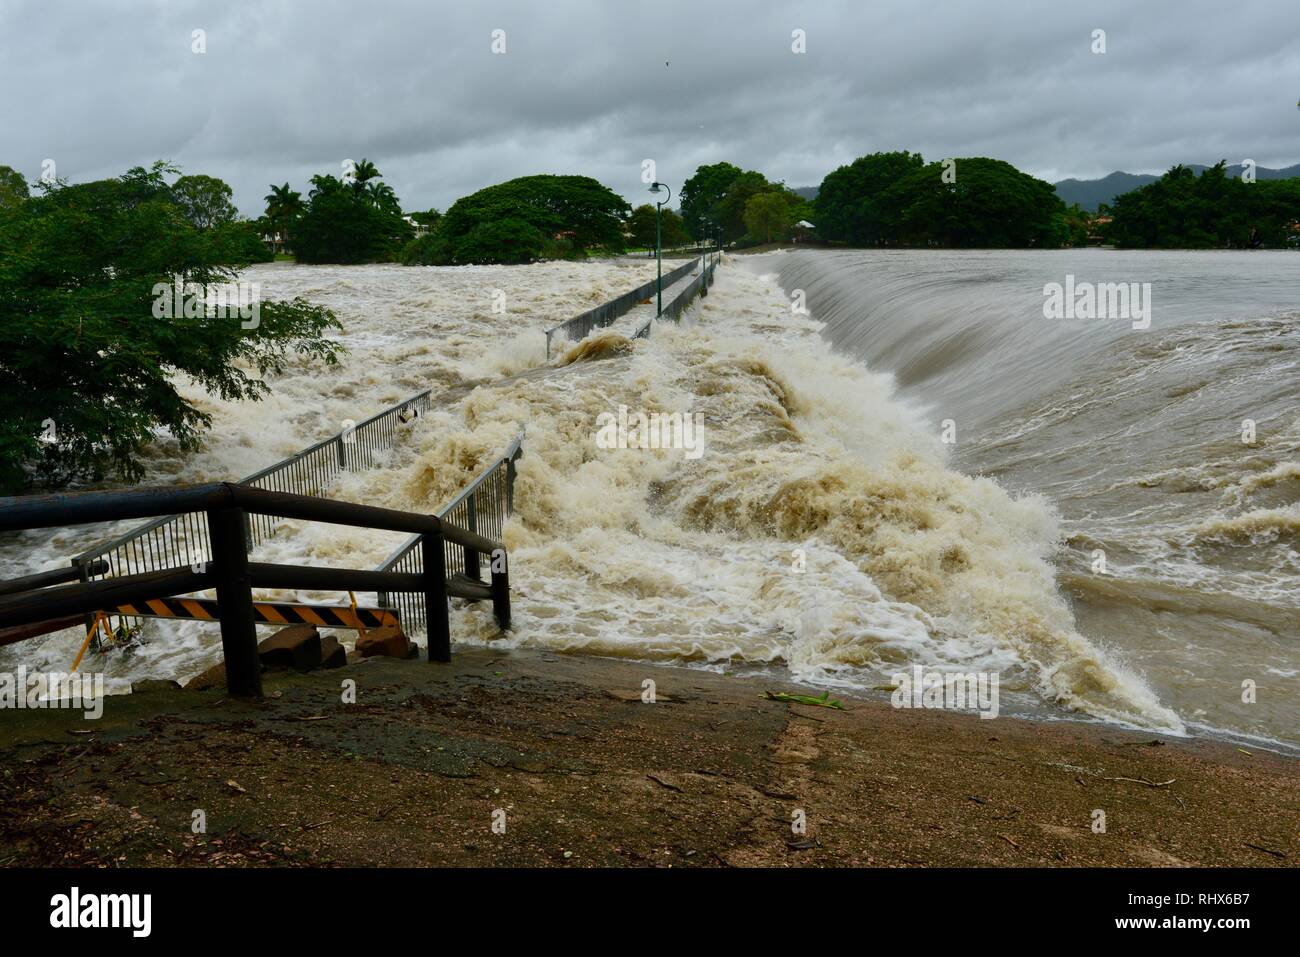 The raging flood waters inundating Aplins weir, Townsville, Queensland, Australia. 4th February, 2019. Flooding continued to worsen as the deluge continued and more water was released from the bulging Ross River dam to prevent the failure of the dam wall. 1000's of residents were evacuated overnight. Credit: P&F Photography/Alamy Live News Stock Photo